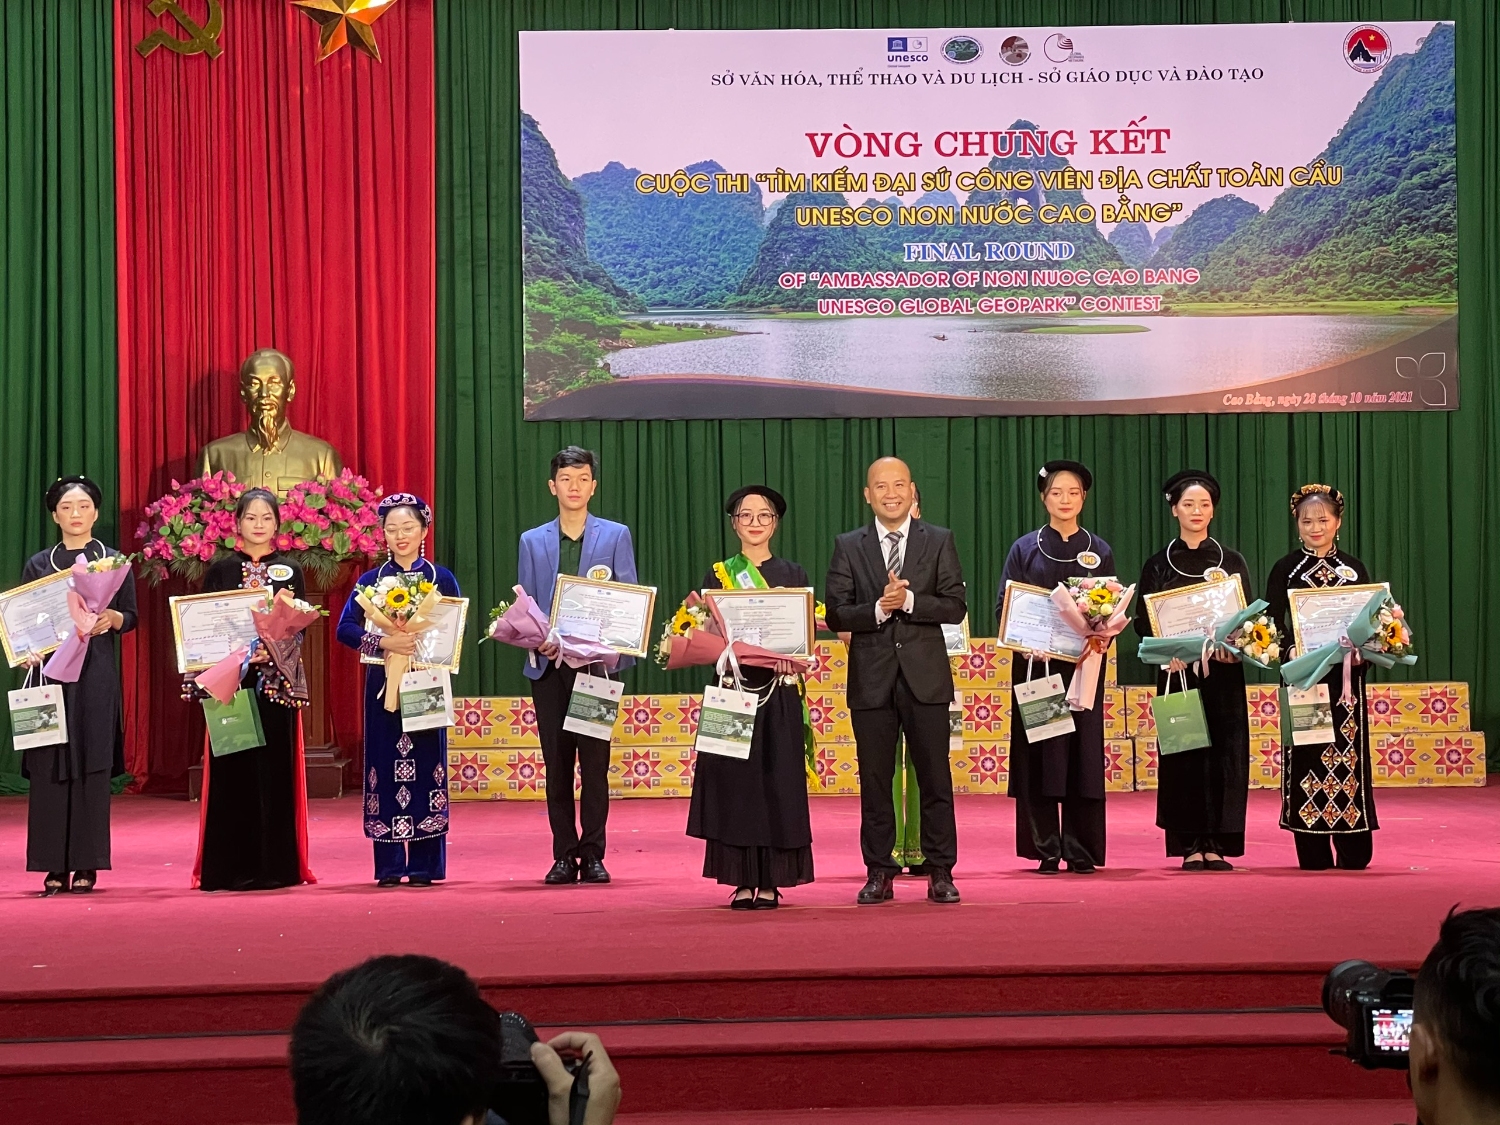 The final round of the “Ambassador of Non nuoc Cao Bang Unesco Global Geopark”